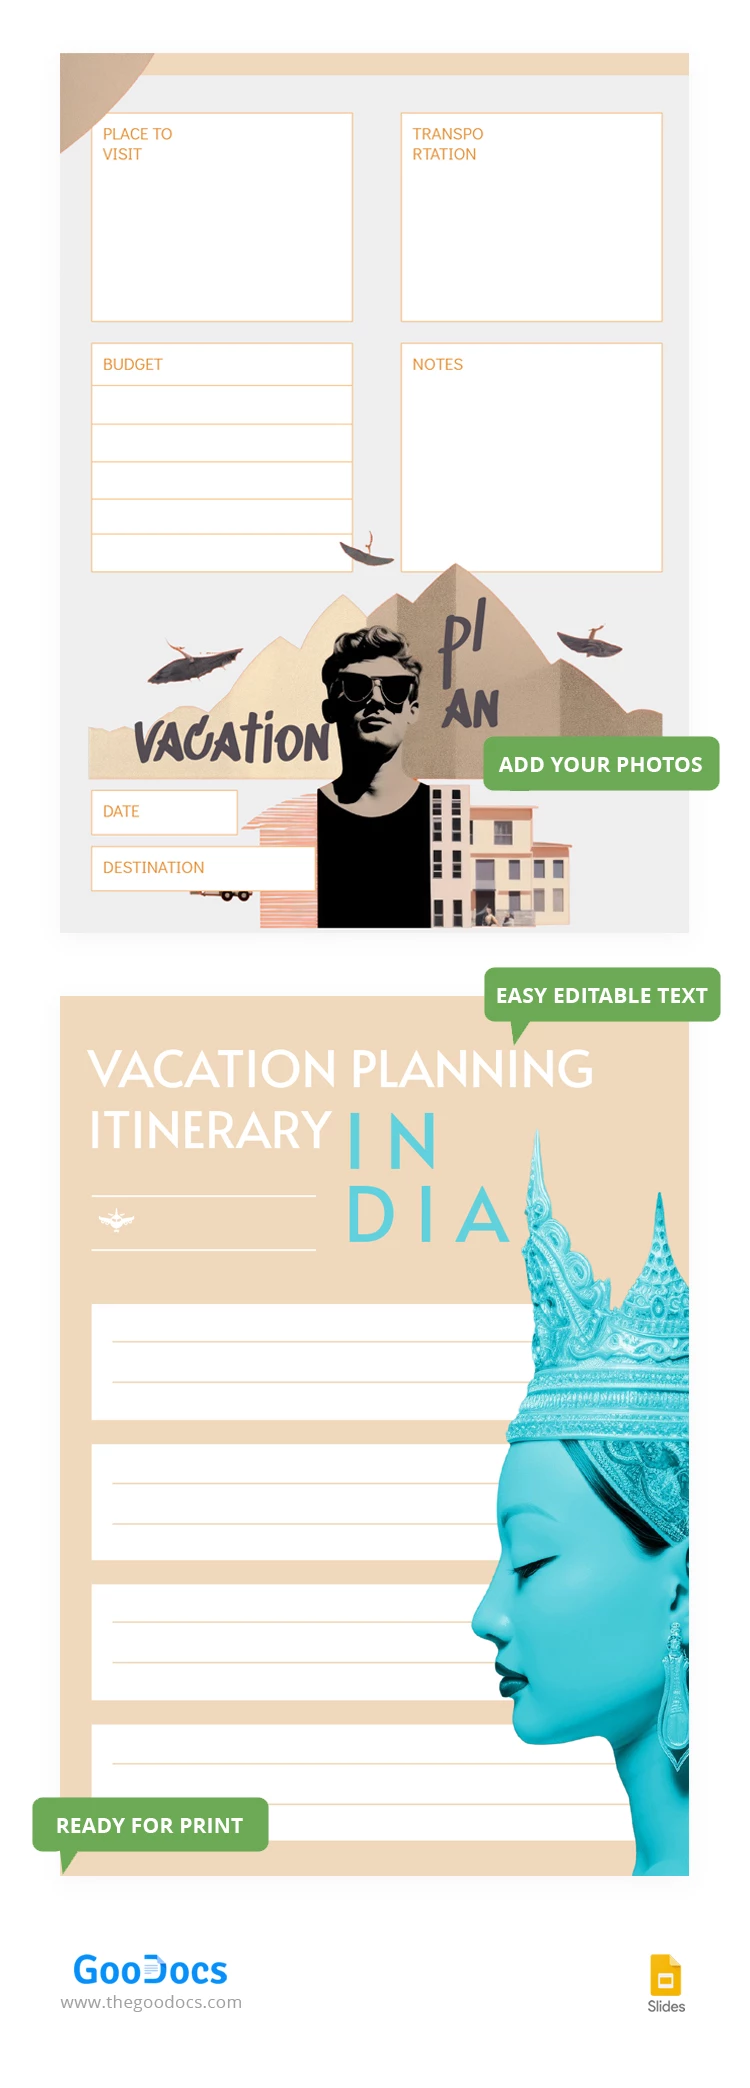 Vacation Planning Itinerary - free Google Docs Template - 10068594